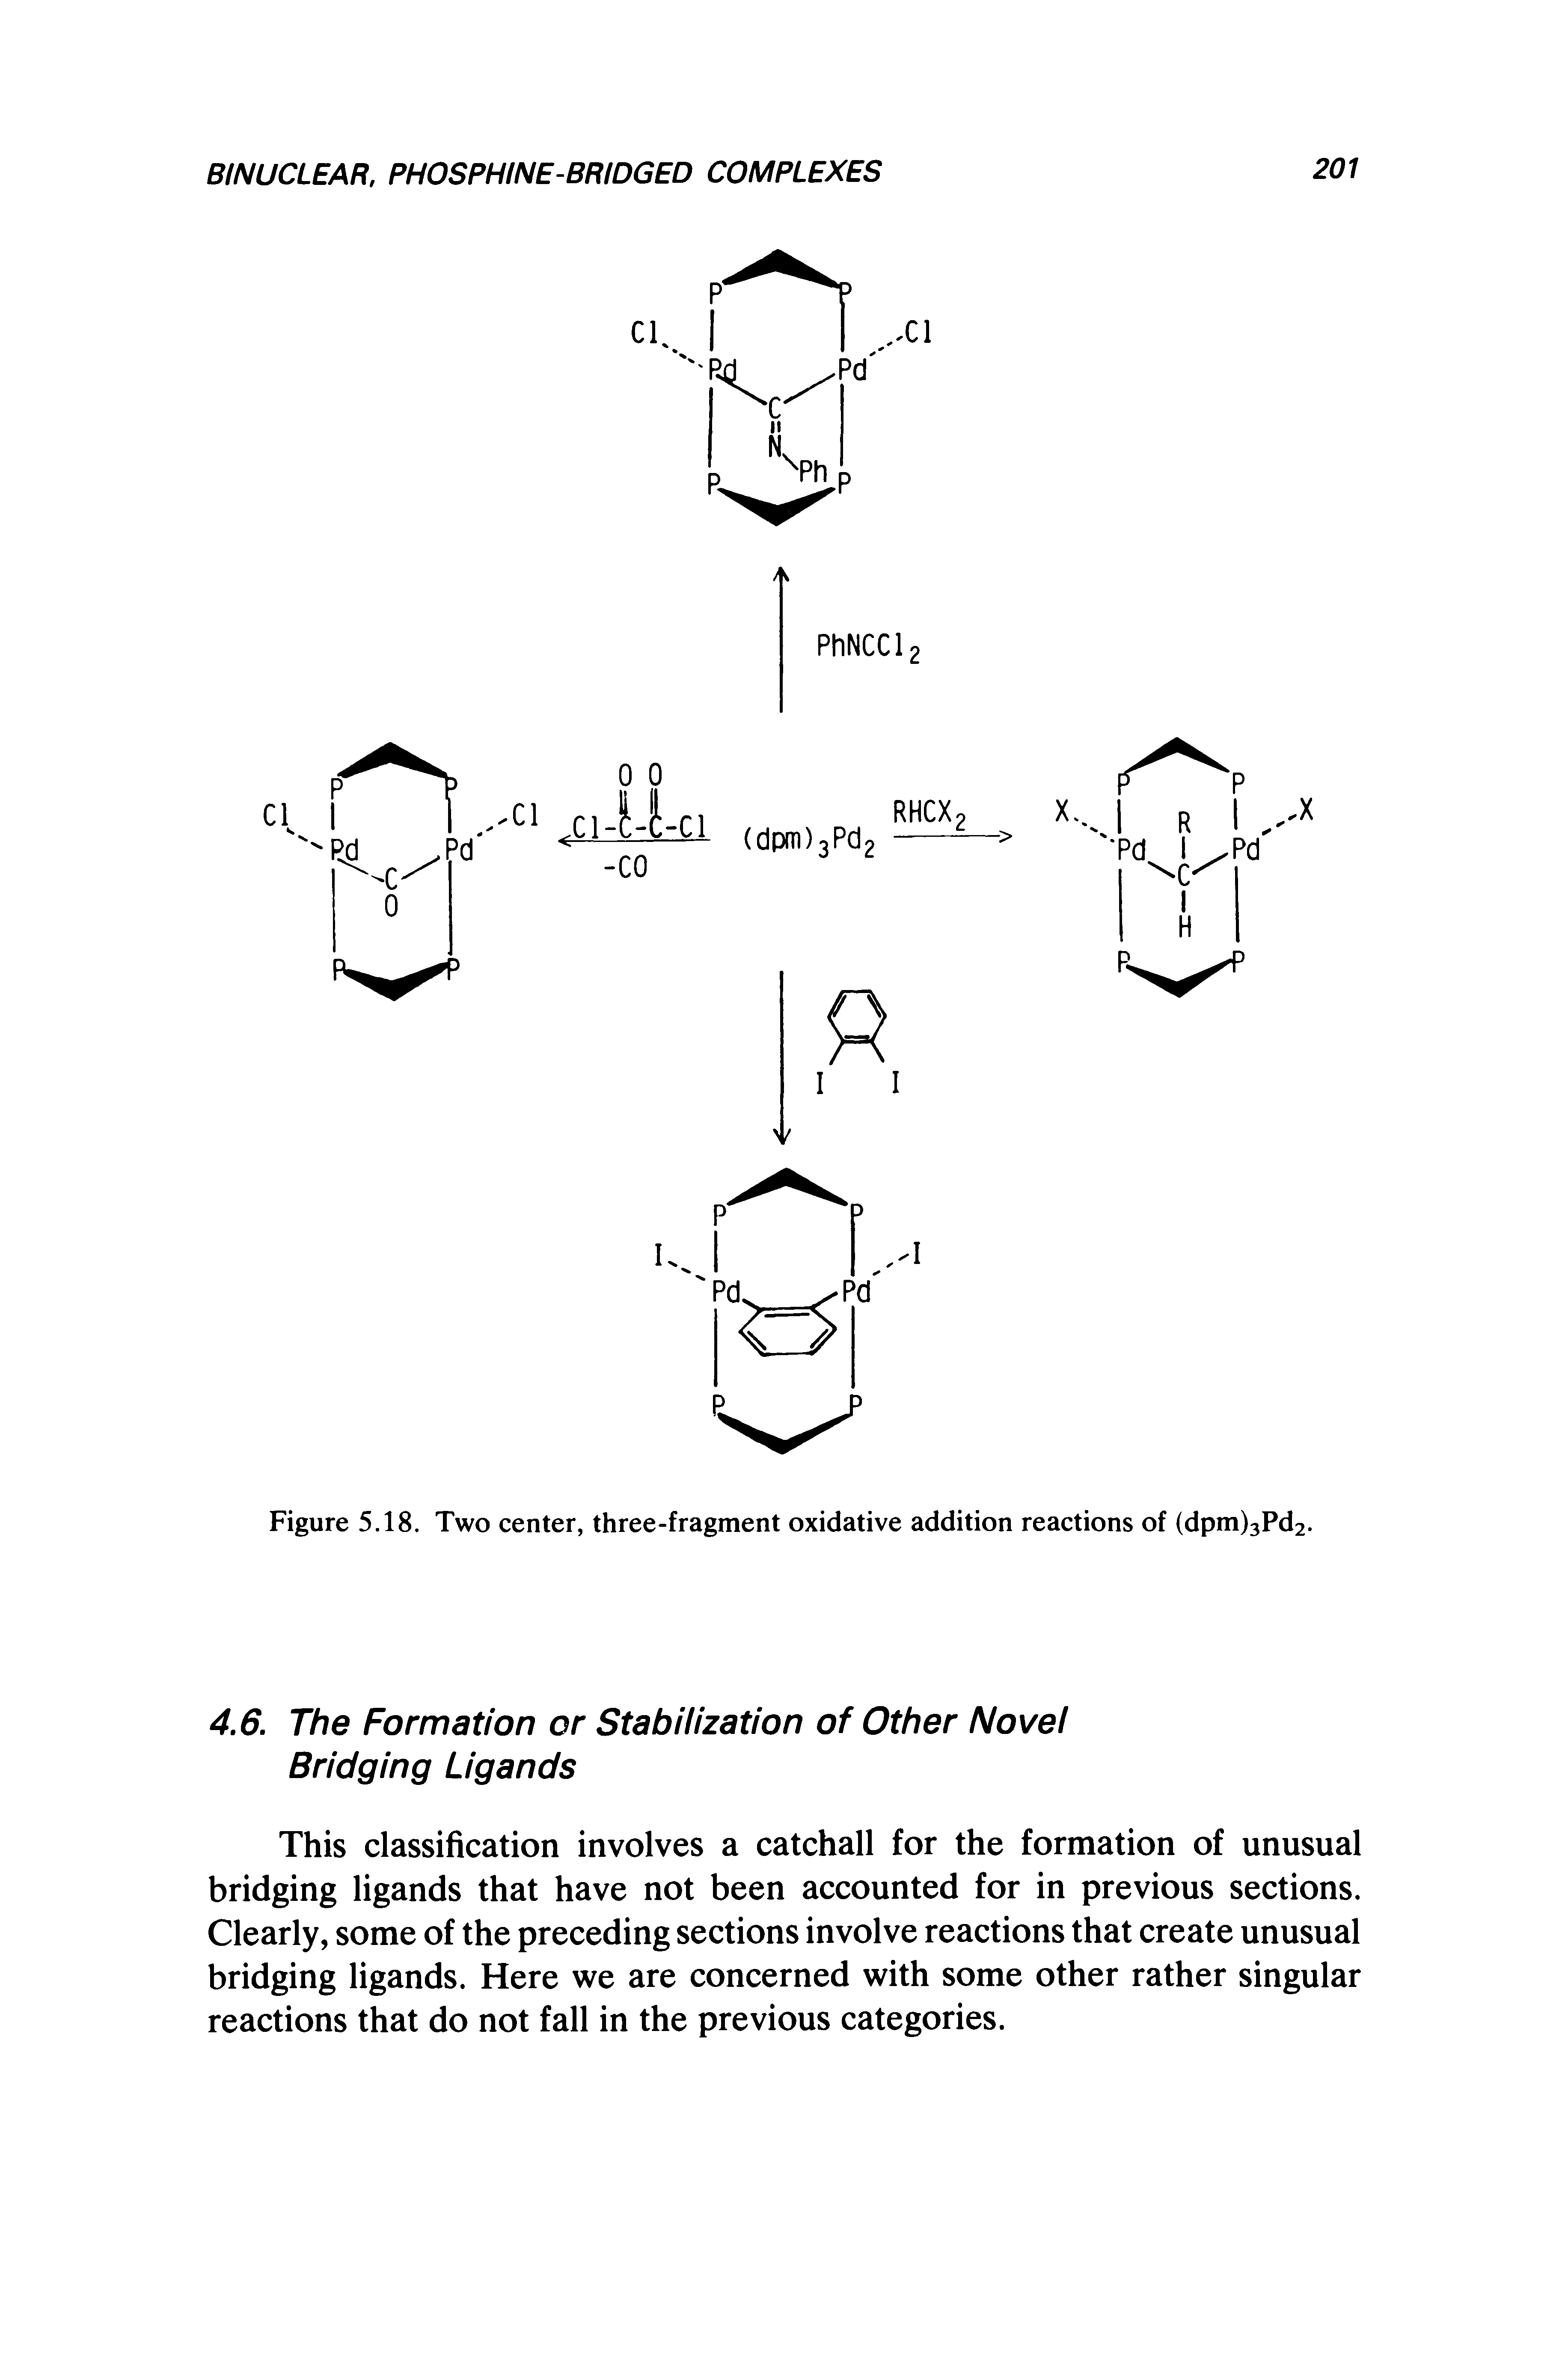 Figure 5.18. Two center, three-fragment oxidative addition reactions of (dpm)3Pd2.